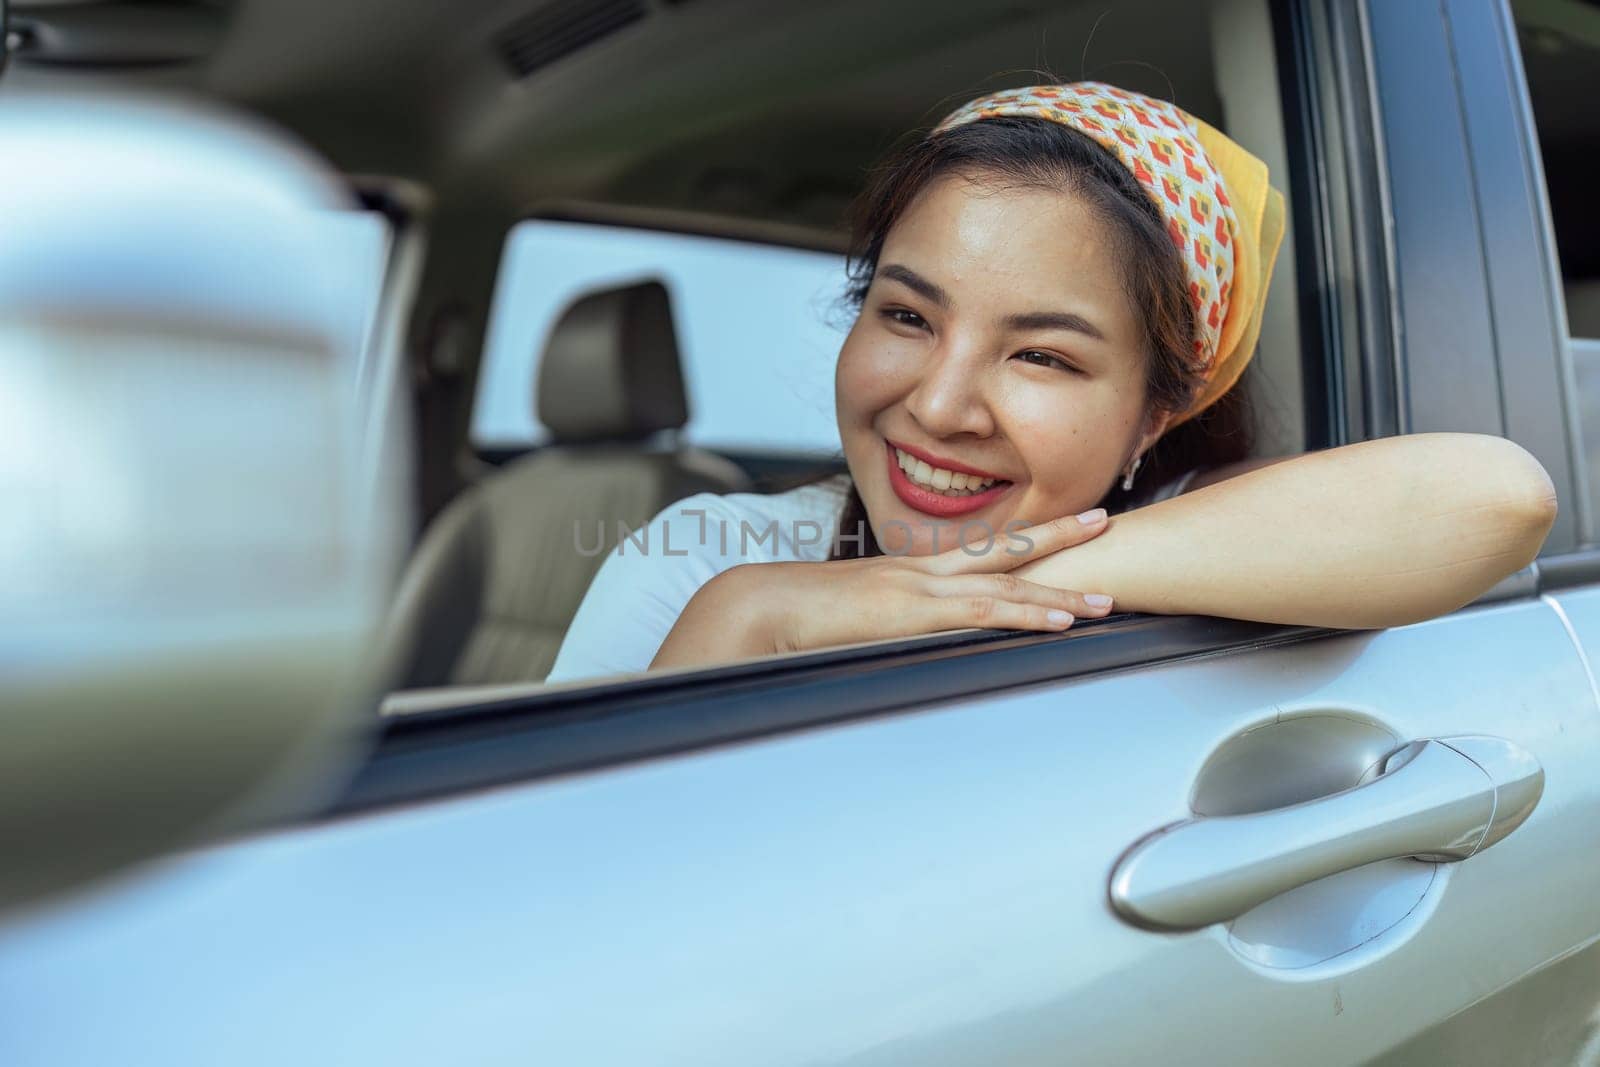 Smiling female driving vehicle on the road on a bright day. Sticking her head out the windshield by itchaznong